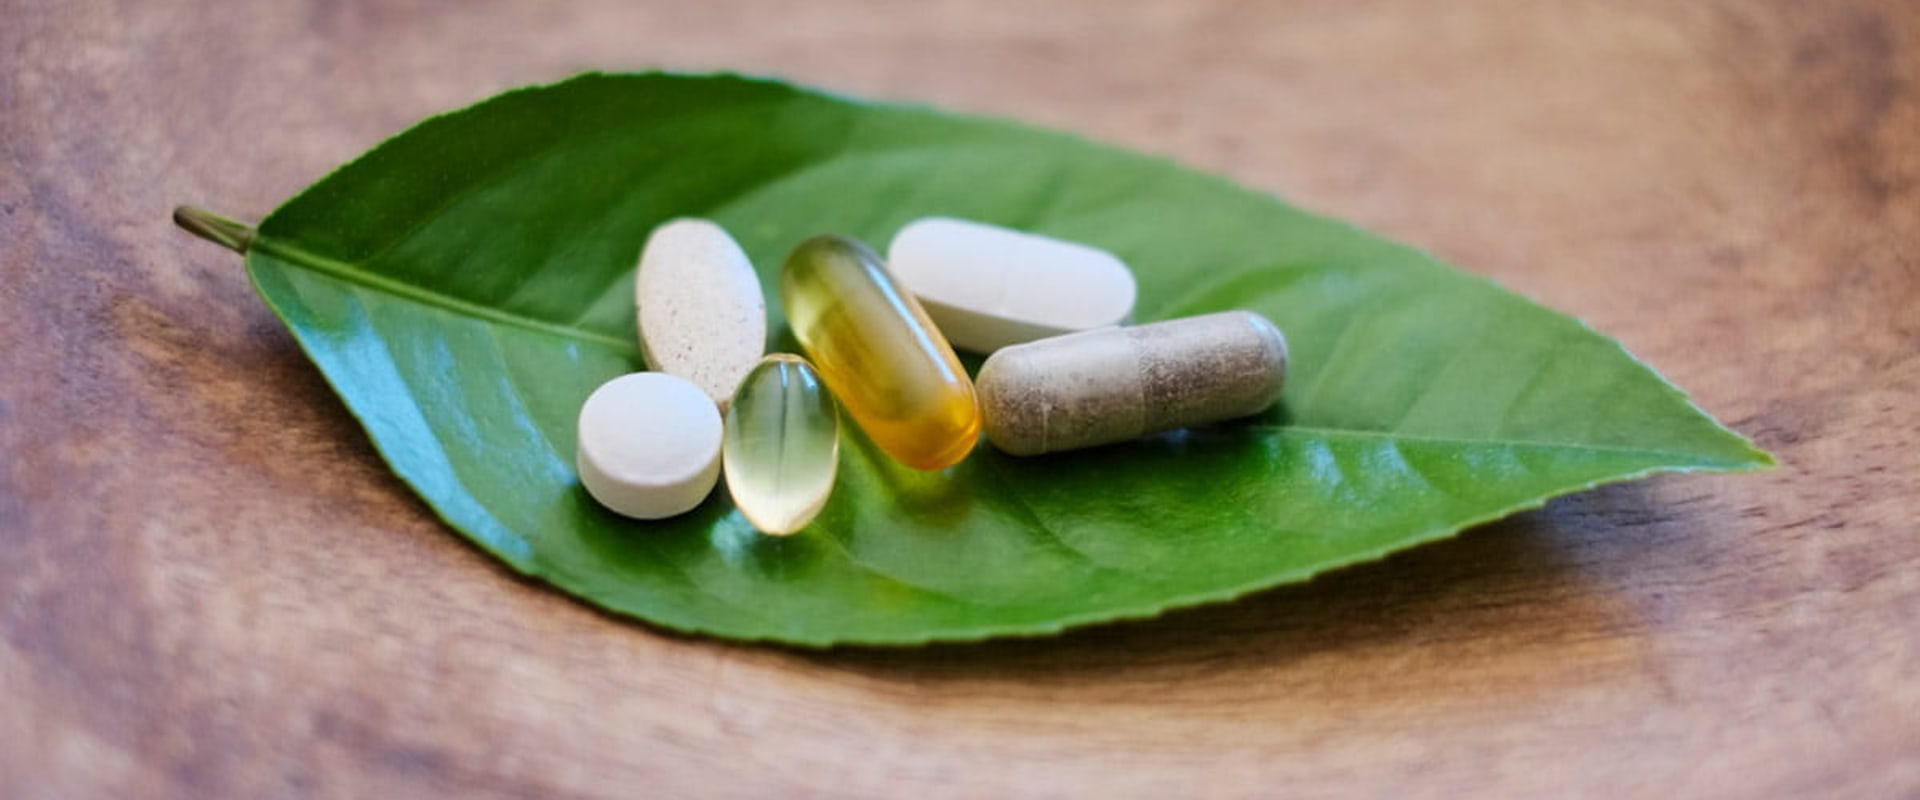 Do Different Dietary and Herbal Supplements Have Different Absorption Rates in the Body?